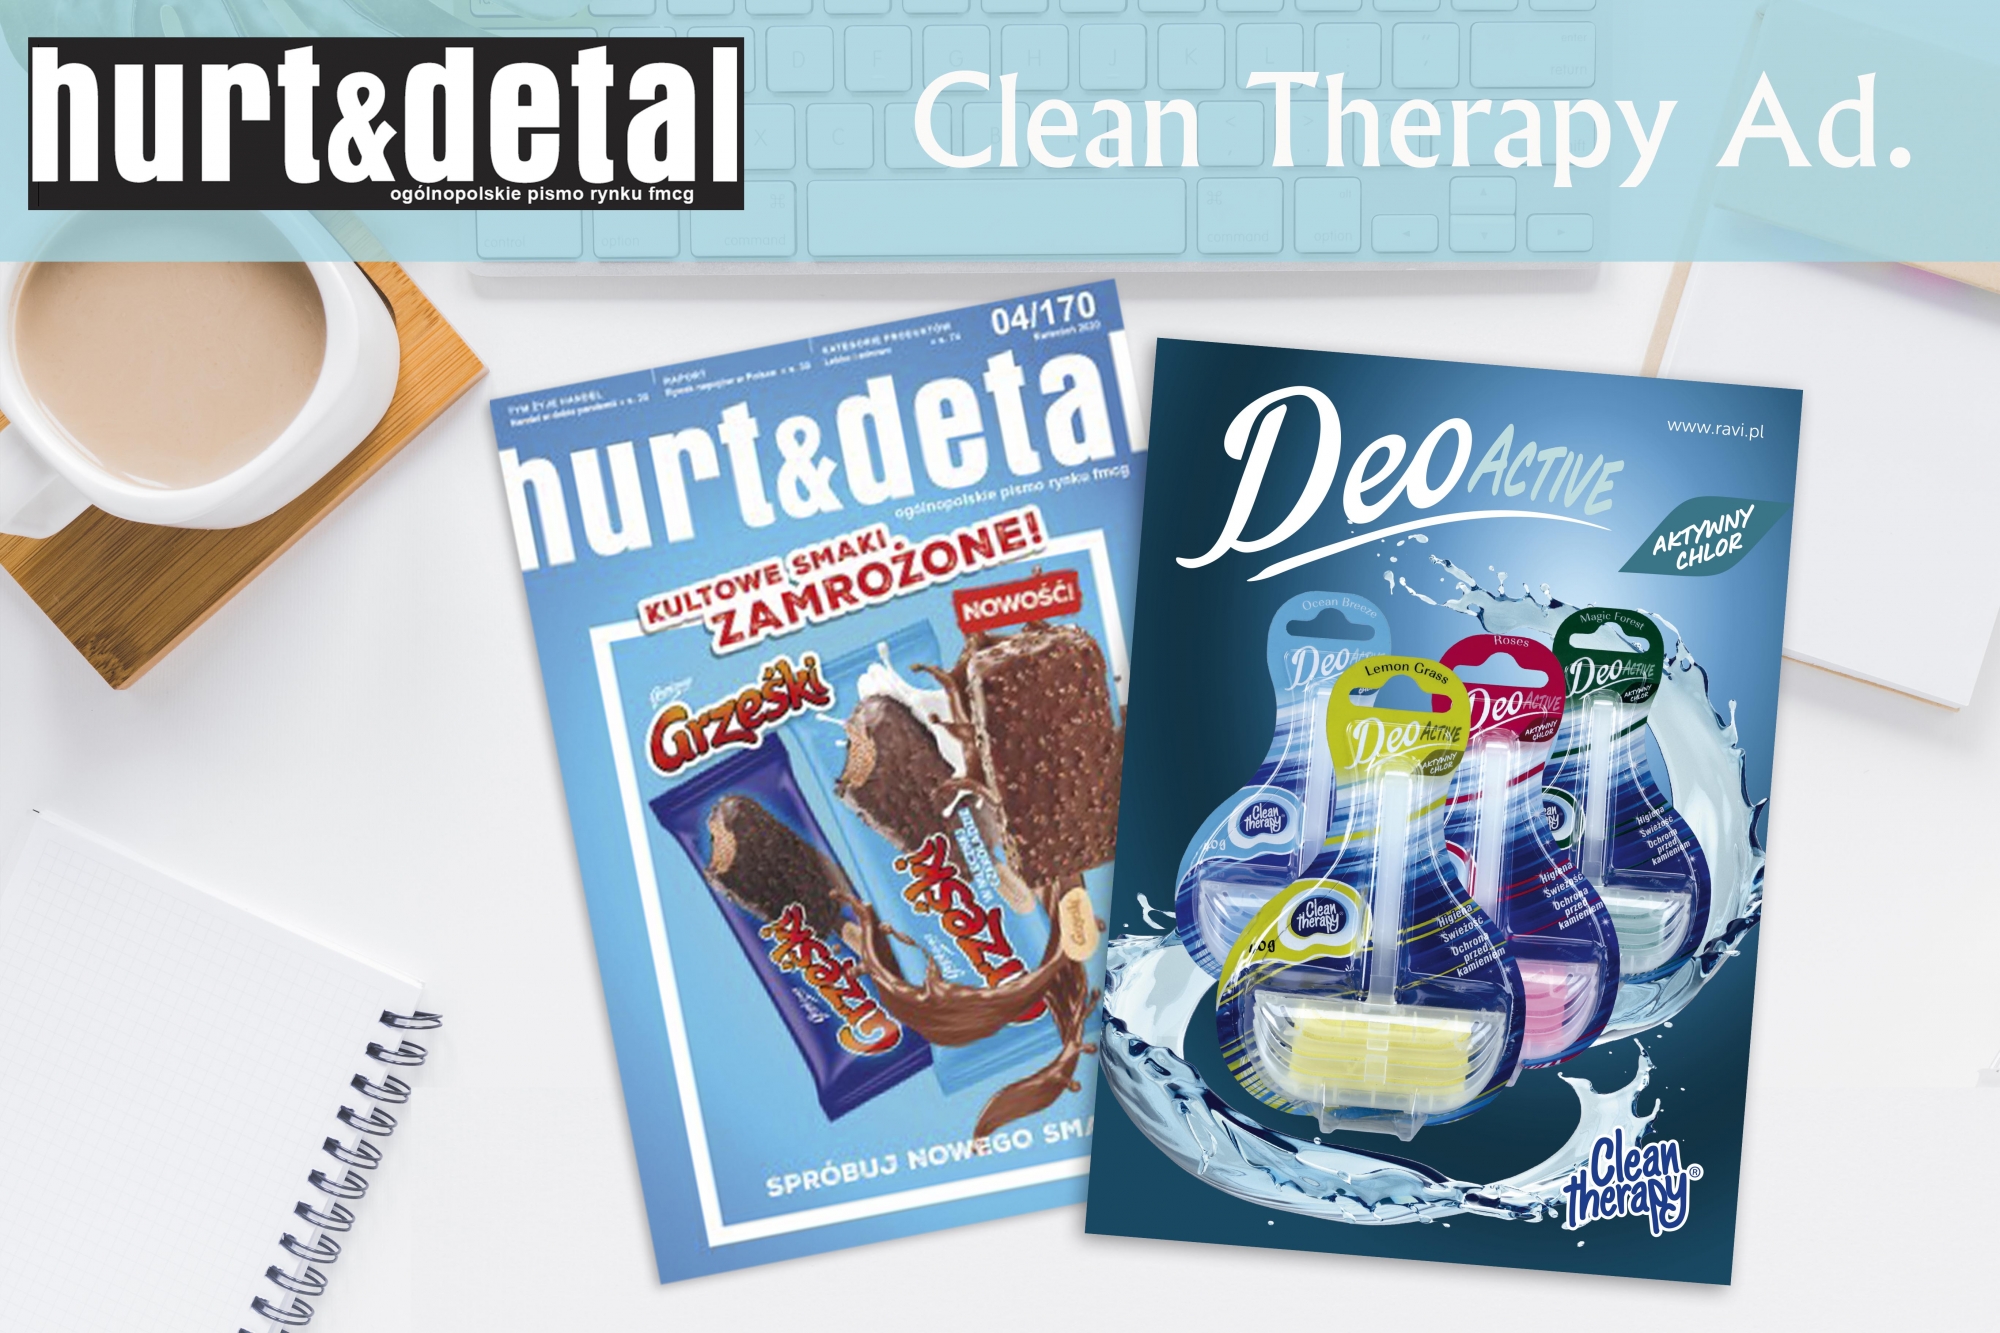 April 2020 Clean Therapy ad.